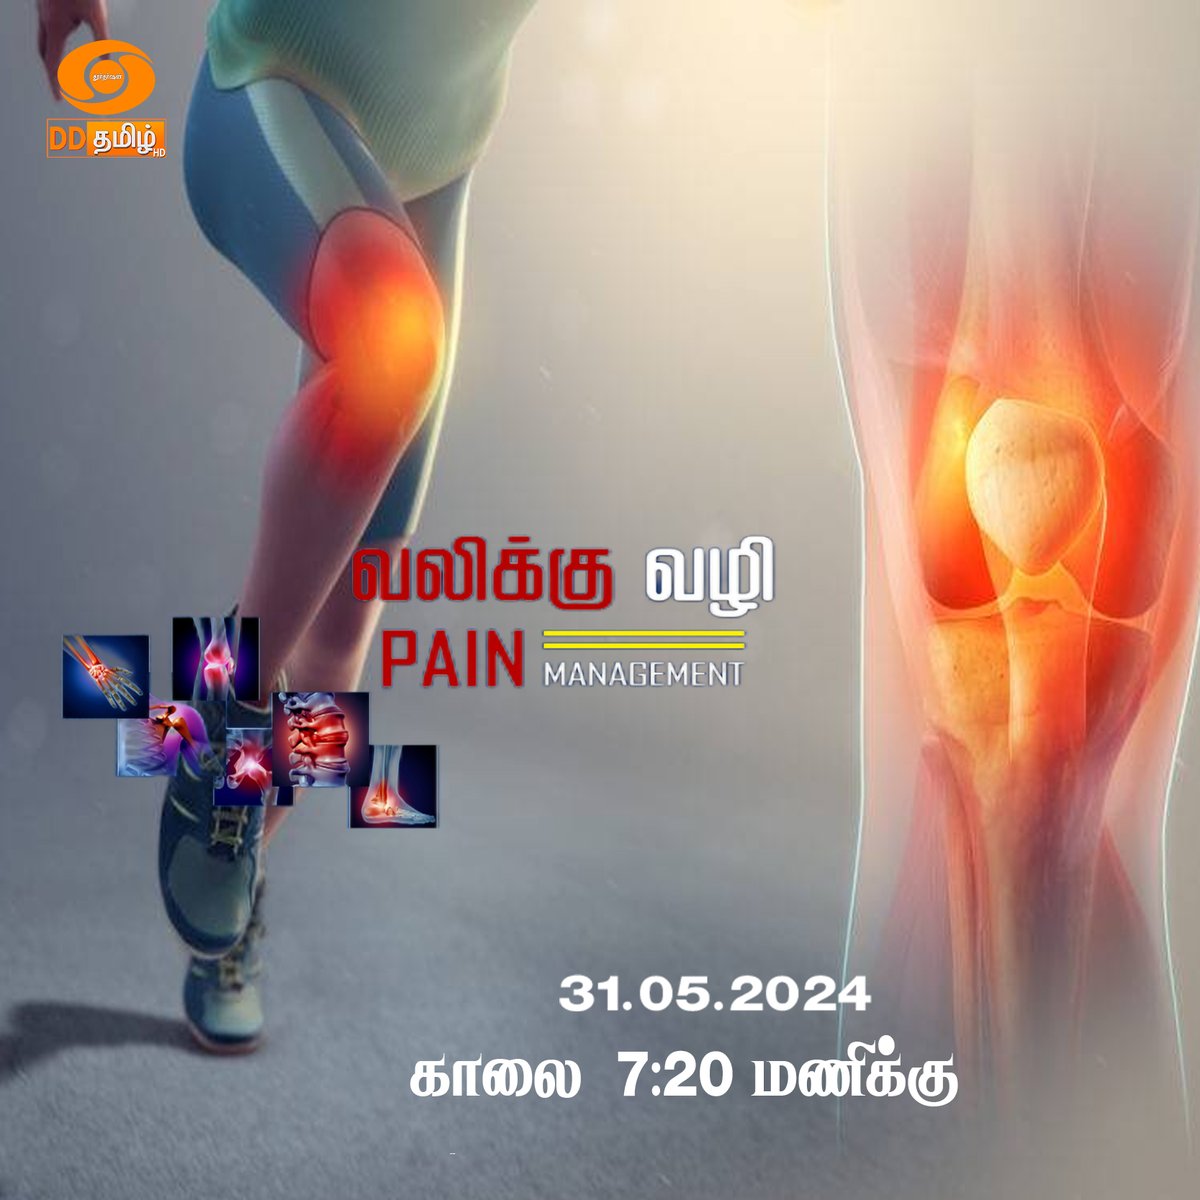 📷 Set your alarms for 7:20 AM ! Join us on @DDTamilOfficial for 'Valikku Vazhi, program dedicated to guiding you on the path to pain-free living. Don't miss out on valuable tips and insights! 📷📷 #PainRelief #HealthTips #DDtamil #valikkuvazhi